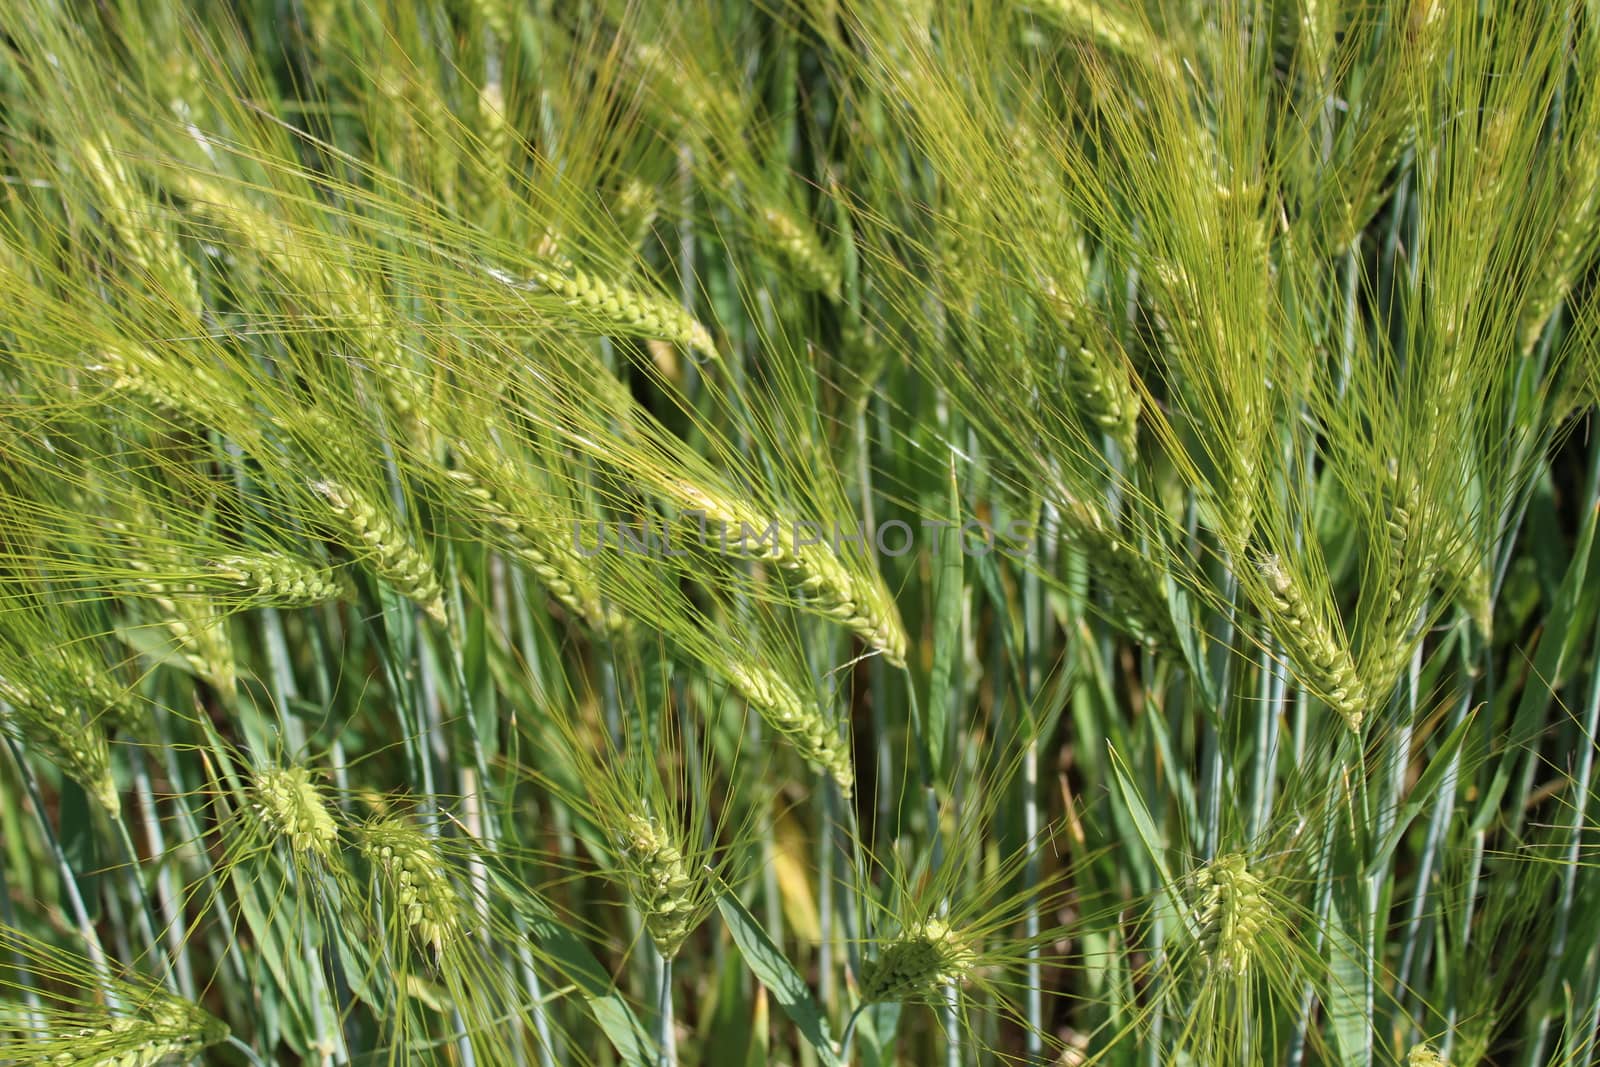 The picture shows rye field with unripe rye